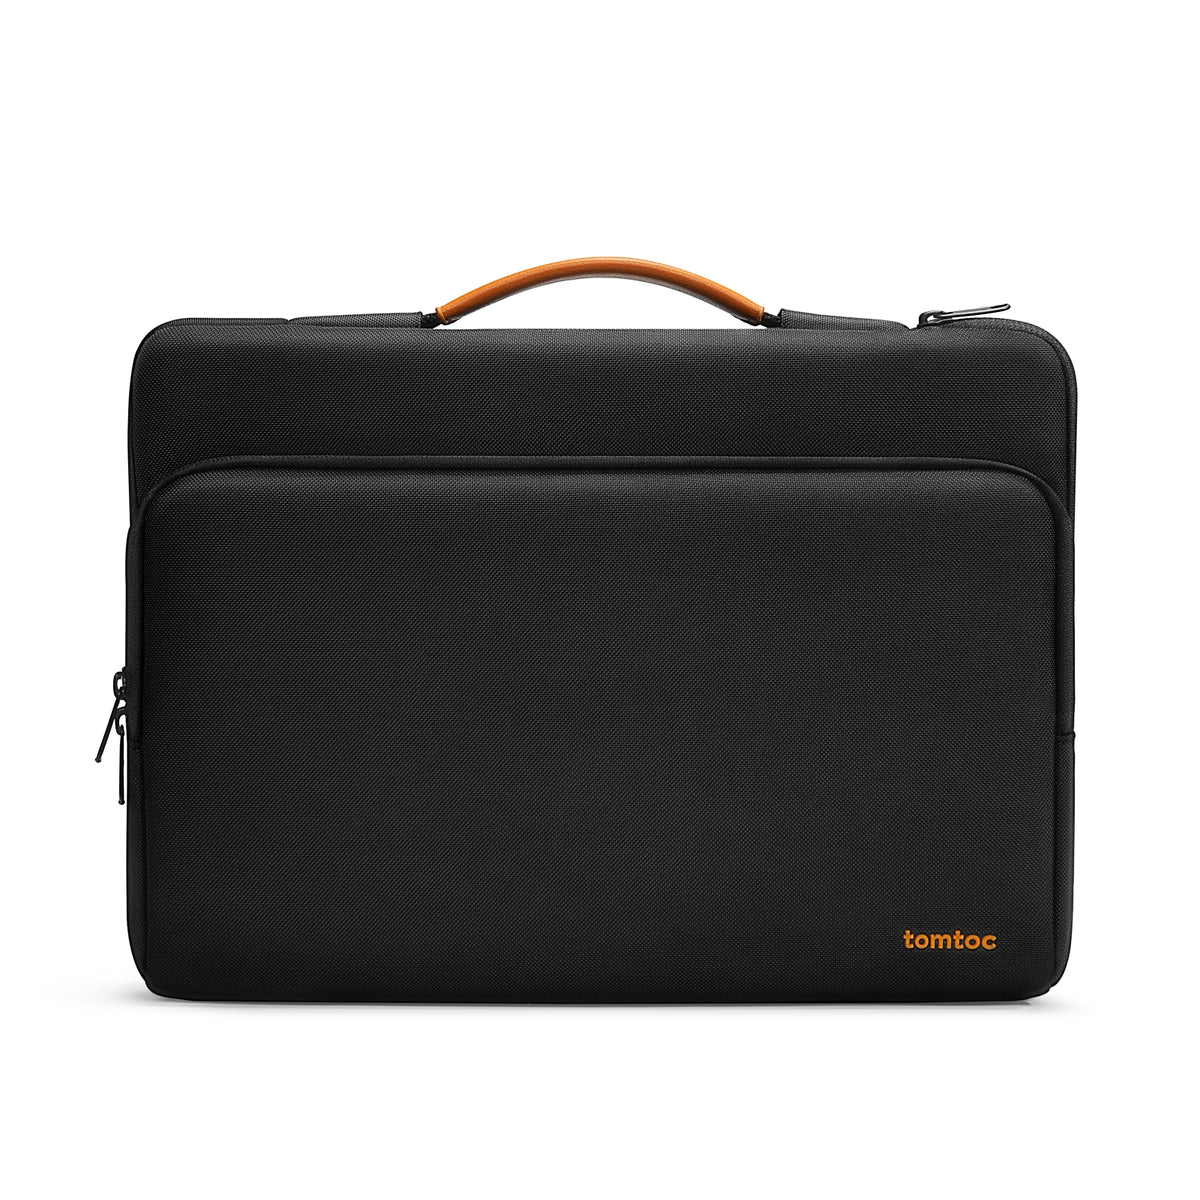 primary_Defender-A14 Laptop Briefcase for for 13-inch MacBook Air | Black